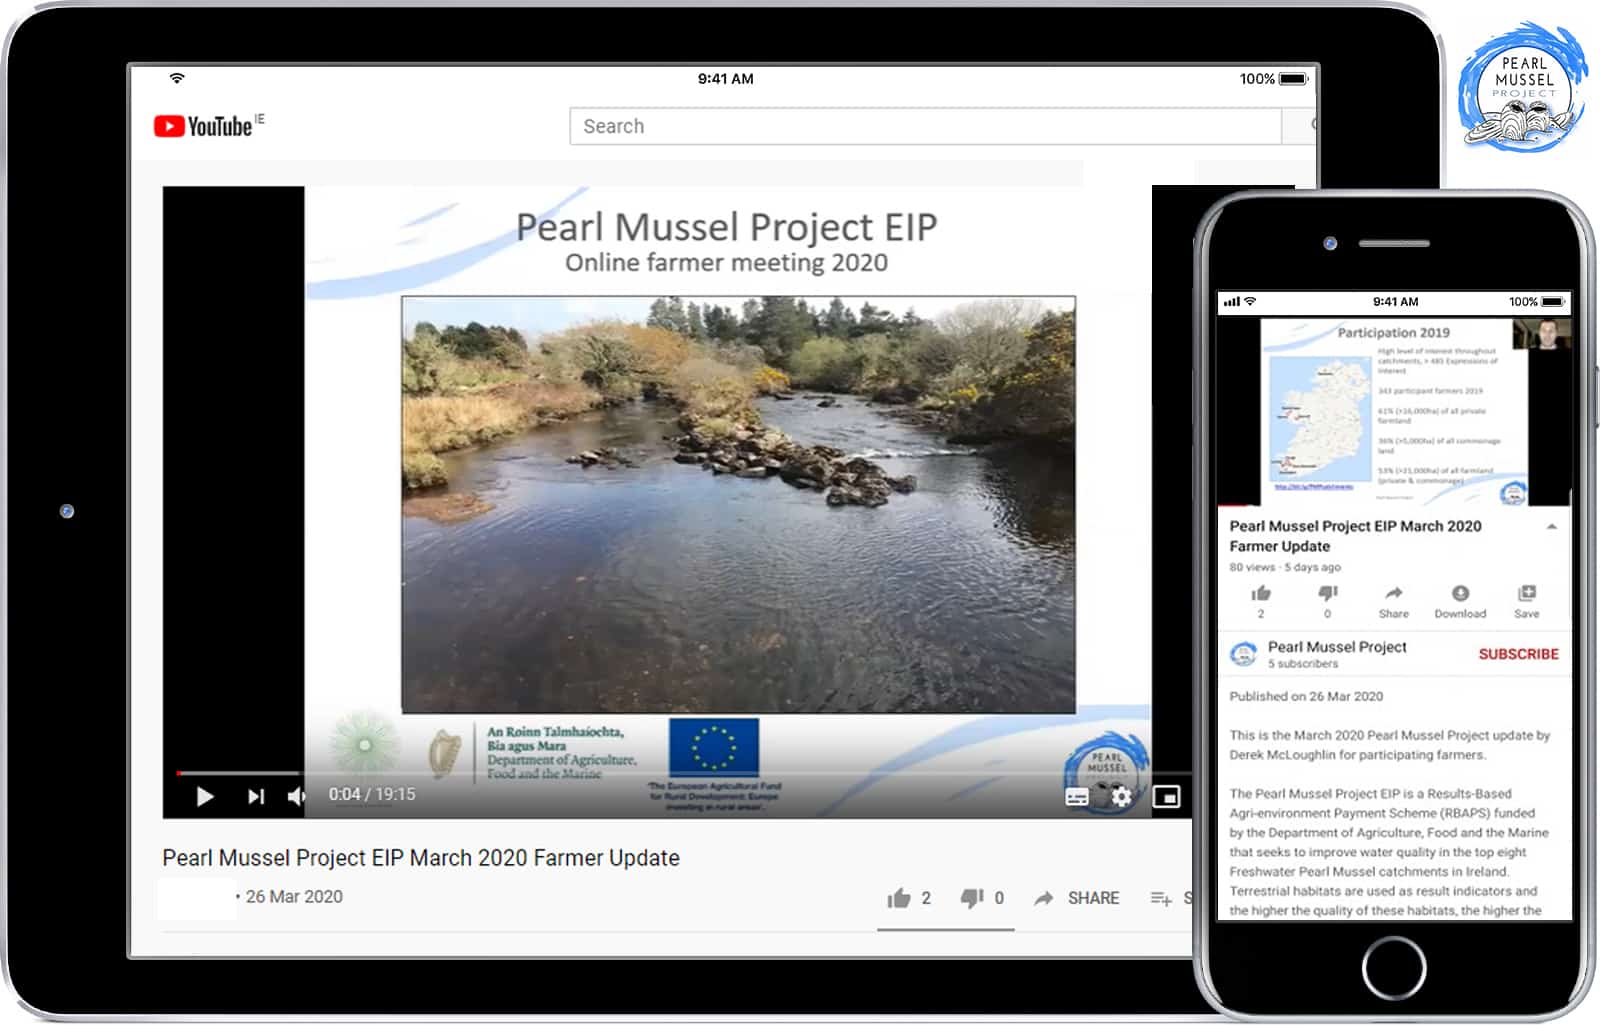 Pearl Mussel Project Online